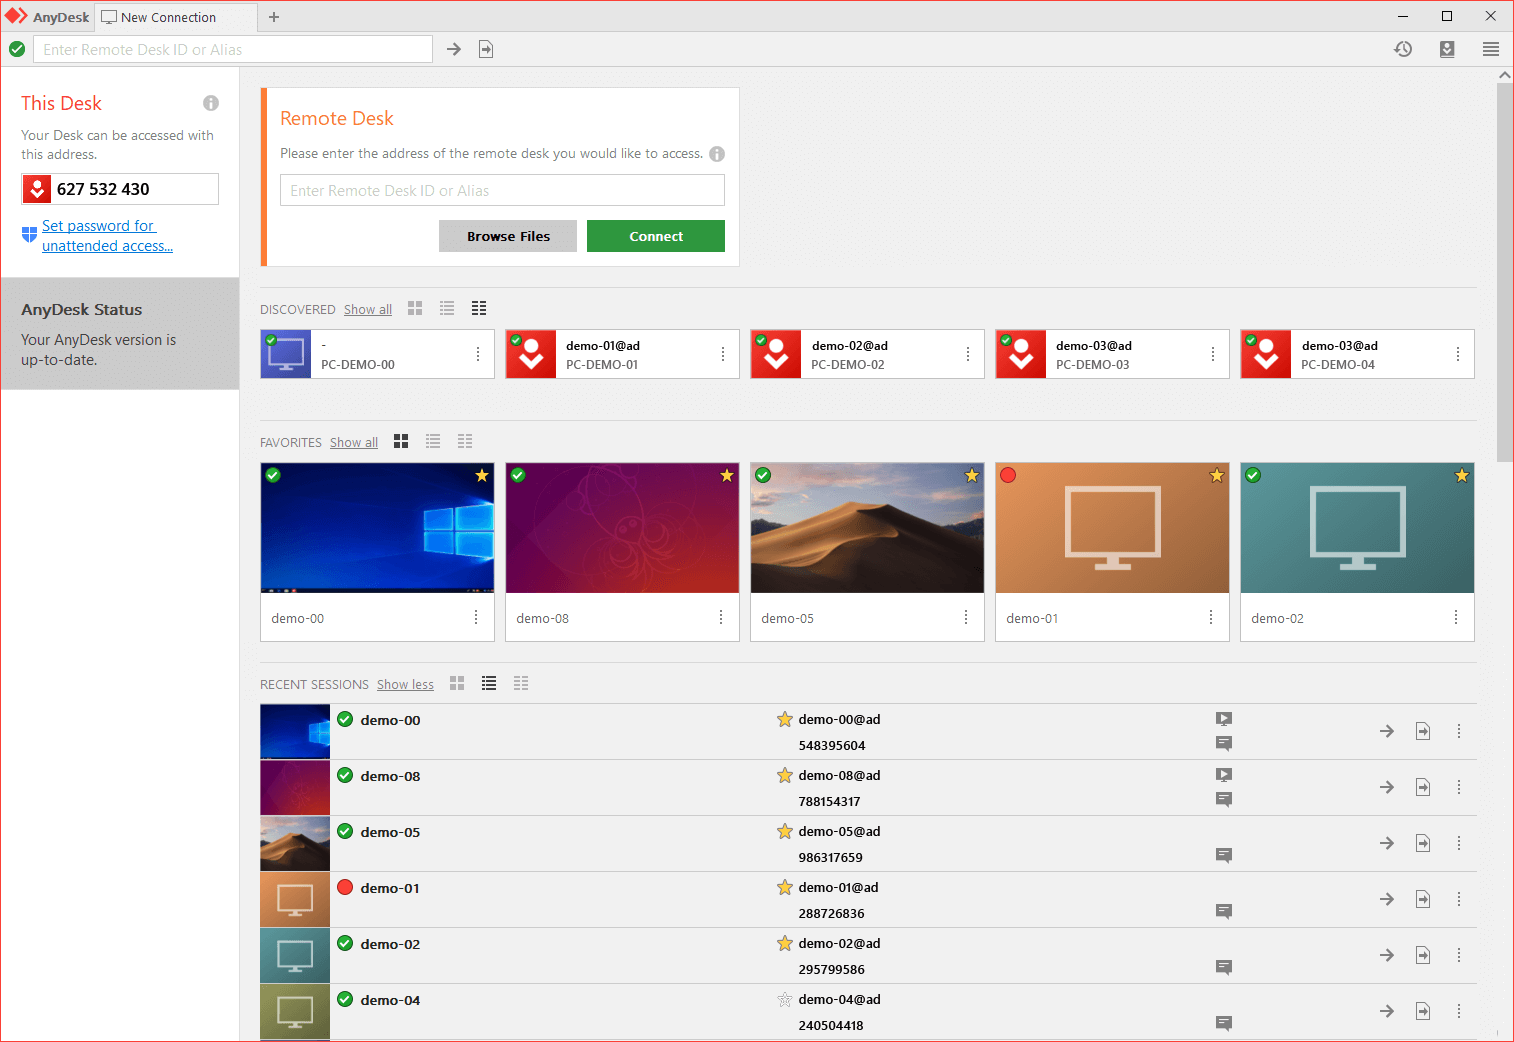 AnyDesk interface